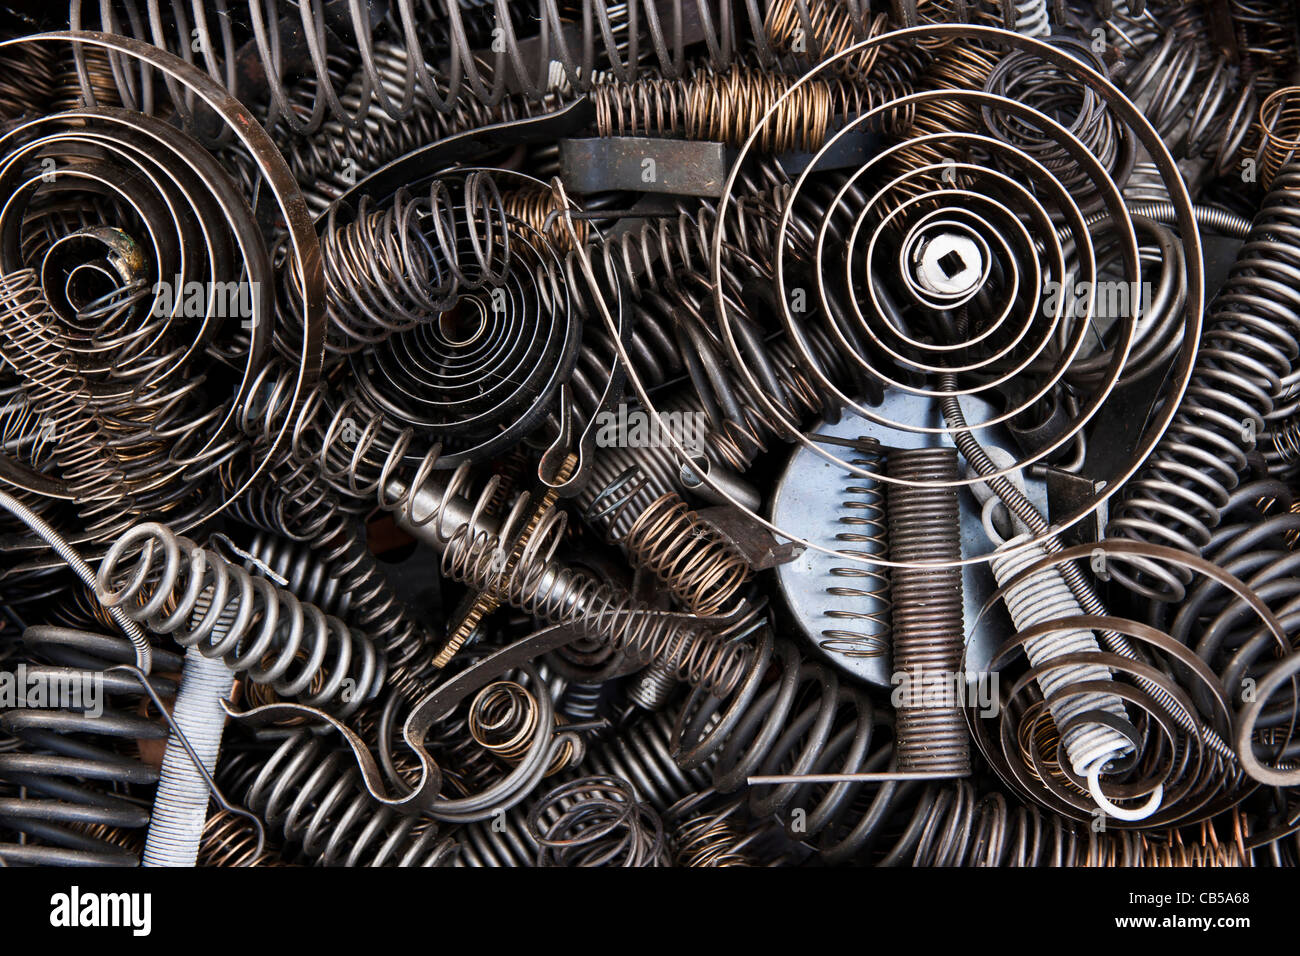 Springs, coils and spare parts Stock Photo